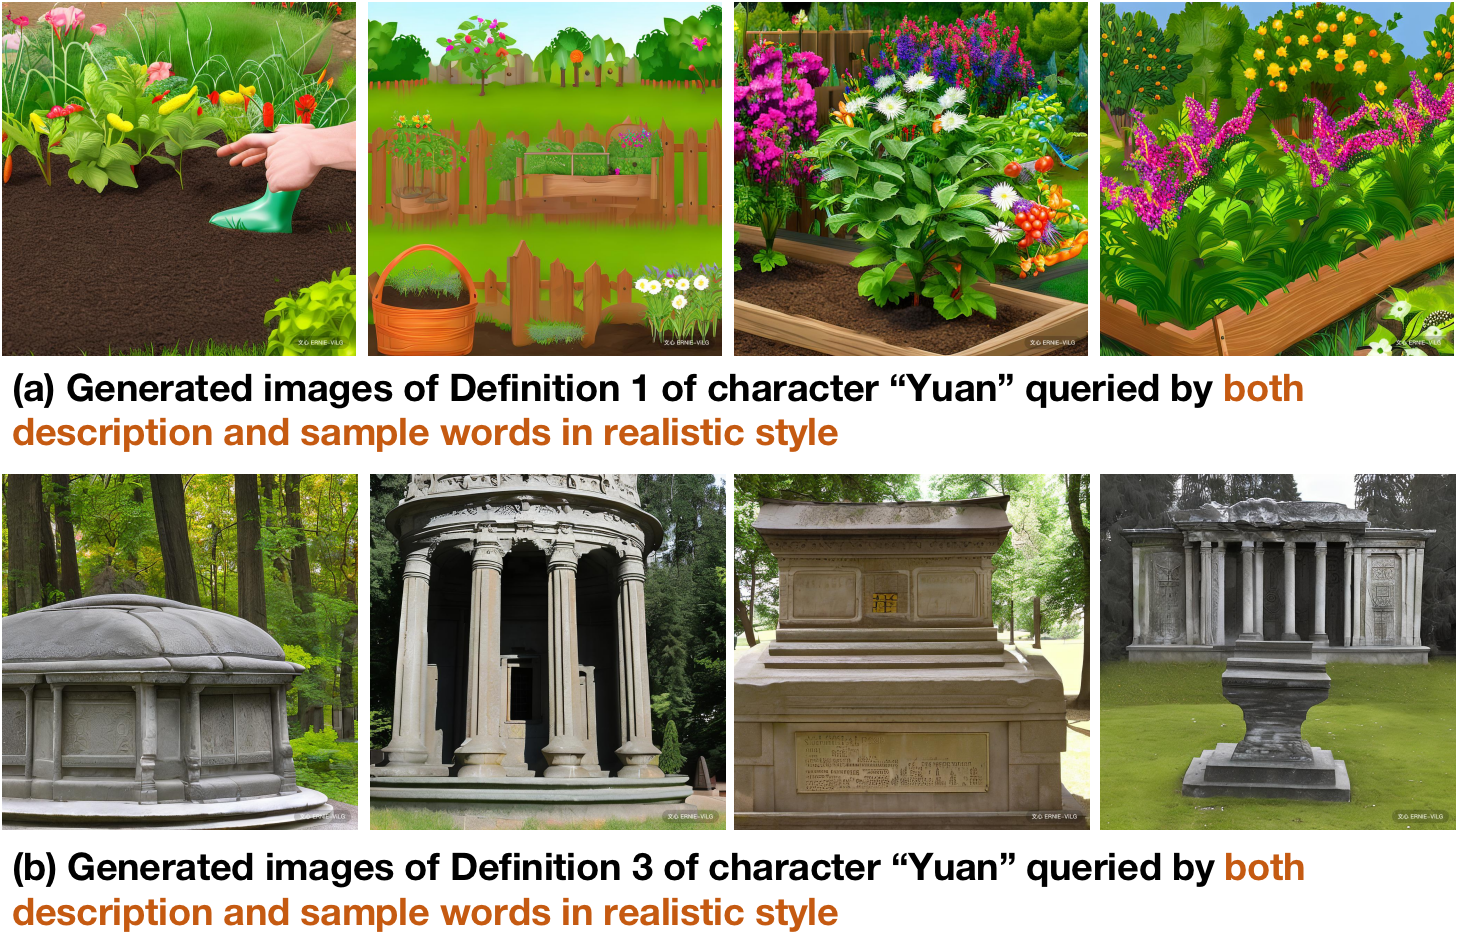 Generated images of \textbf{Definition 1 and 3} of Character “Yuan”